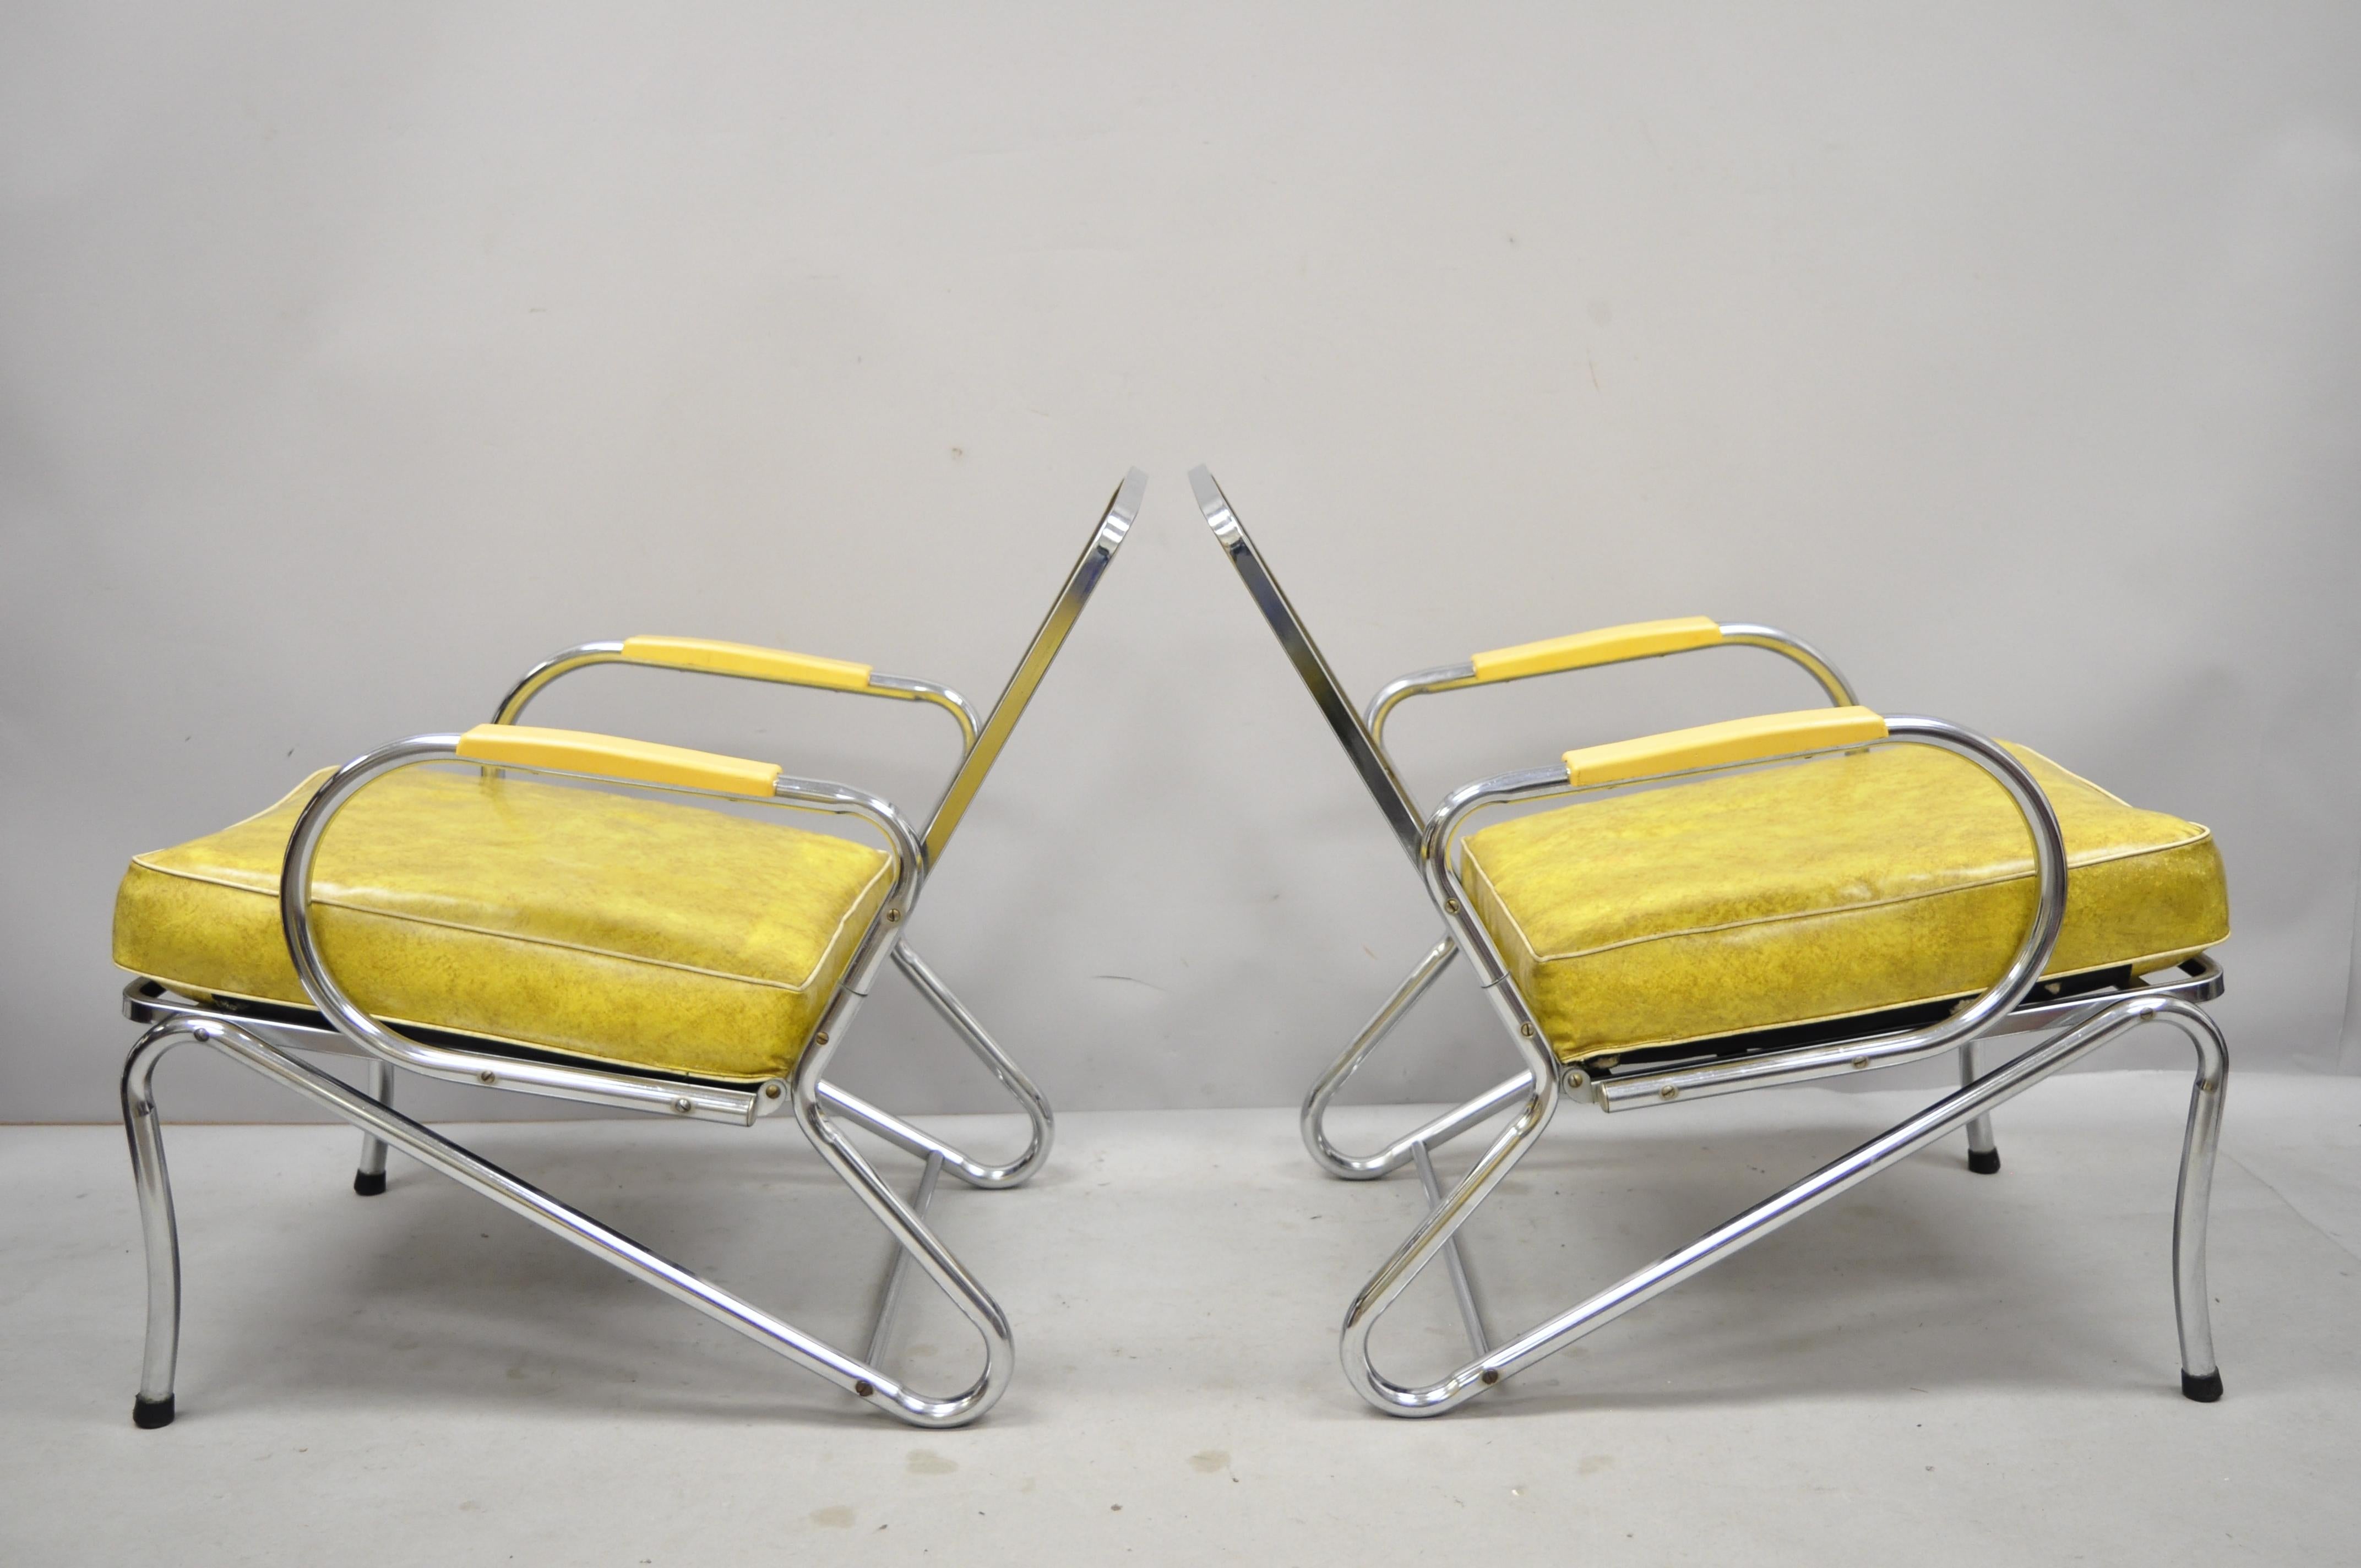 Pair of Art Deco Tubular chrome yellow vinyl club lounge armchairs attributed to Lloyd Mfg. Listing includes original vinyl cushions, metal frames, clean modernist lines, sleek sculptural form. Maker unconfirmed, but possibly by KEM Weber for Lloyd